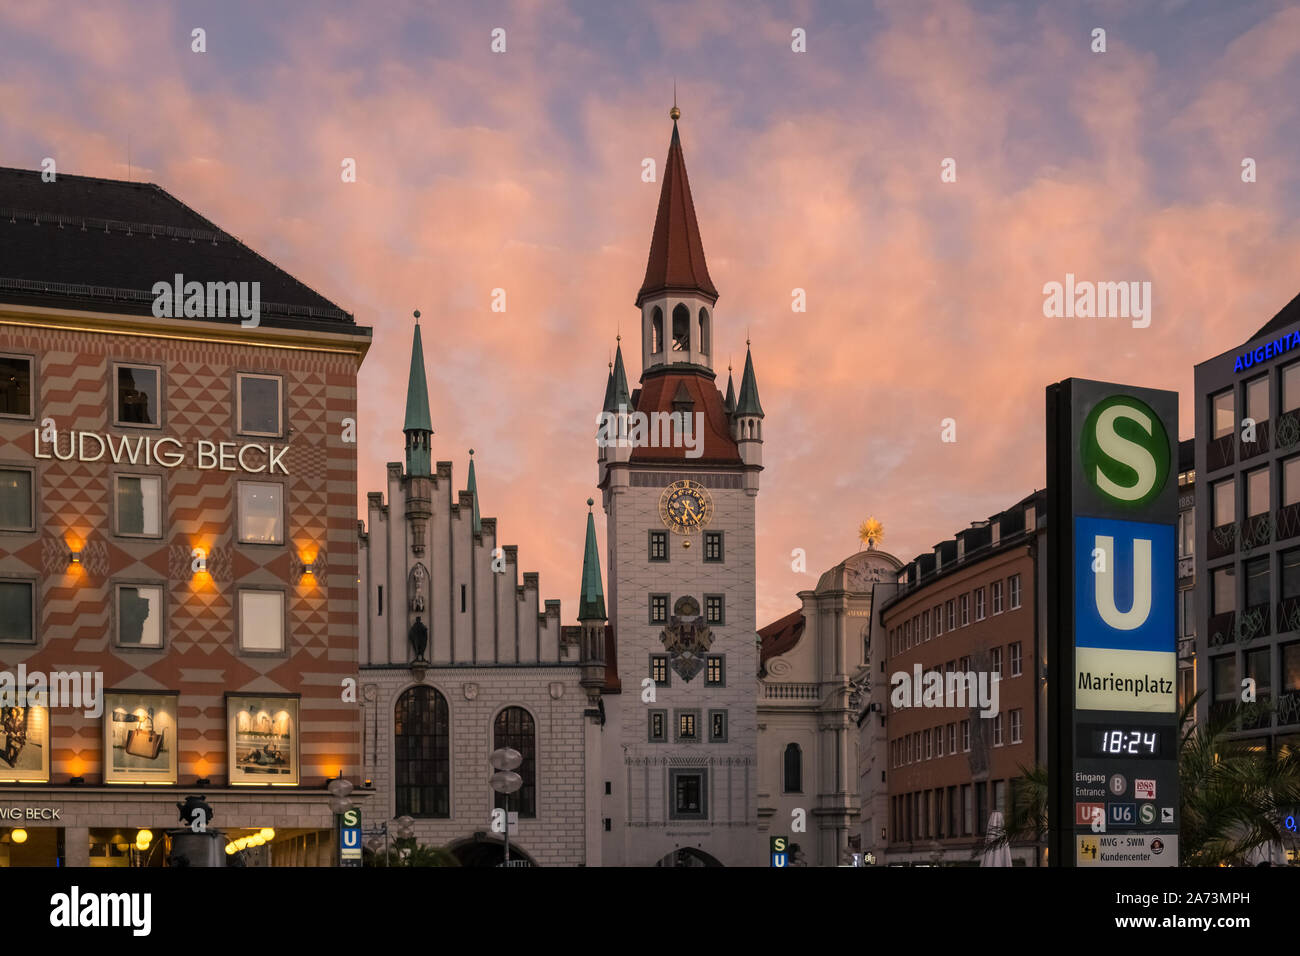 Marienplatz, Altstadt, Munich, Germany. Architecture styles in busy part of Old Town at dusk. Stock Photo